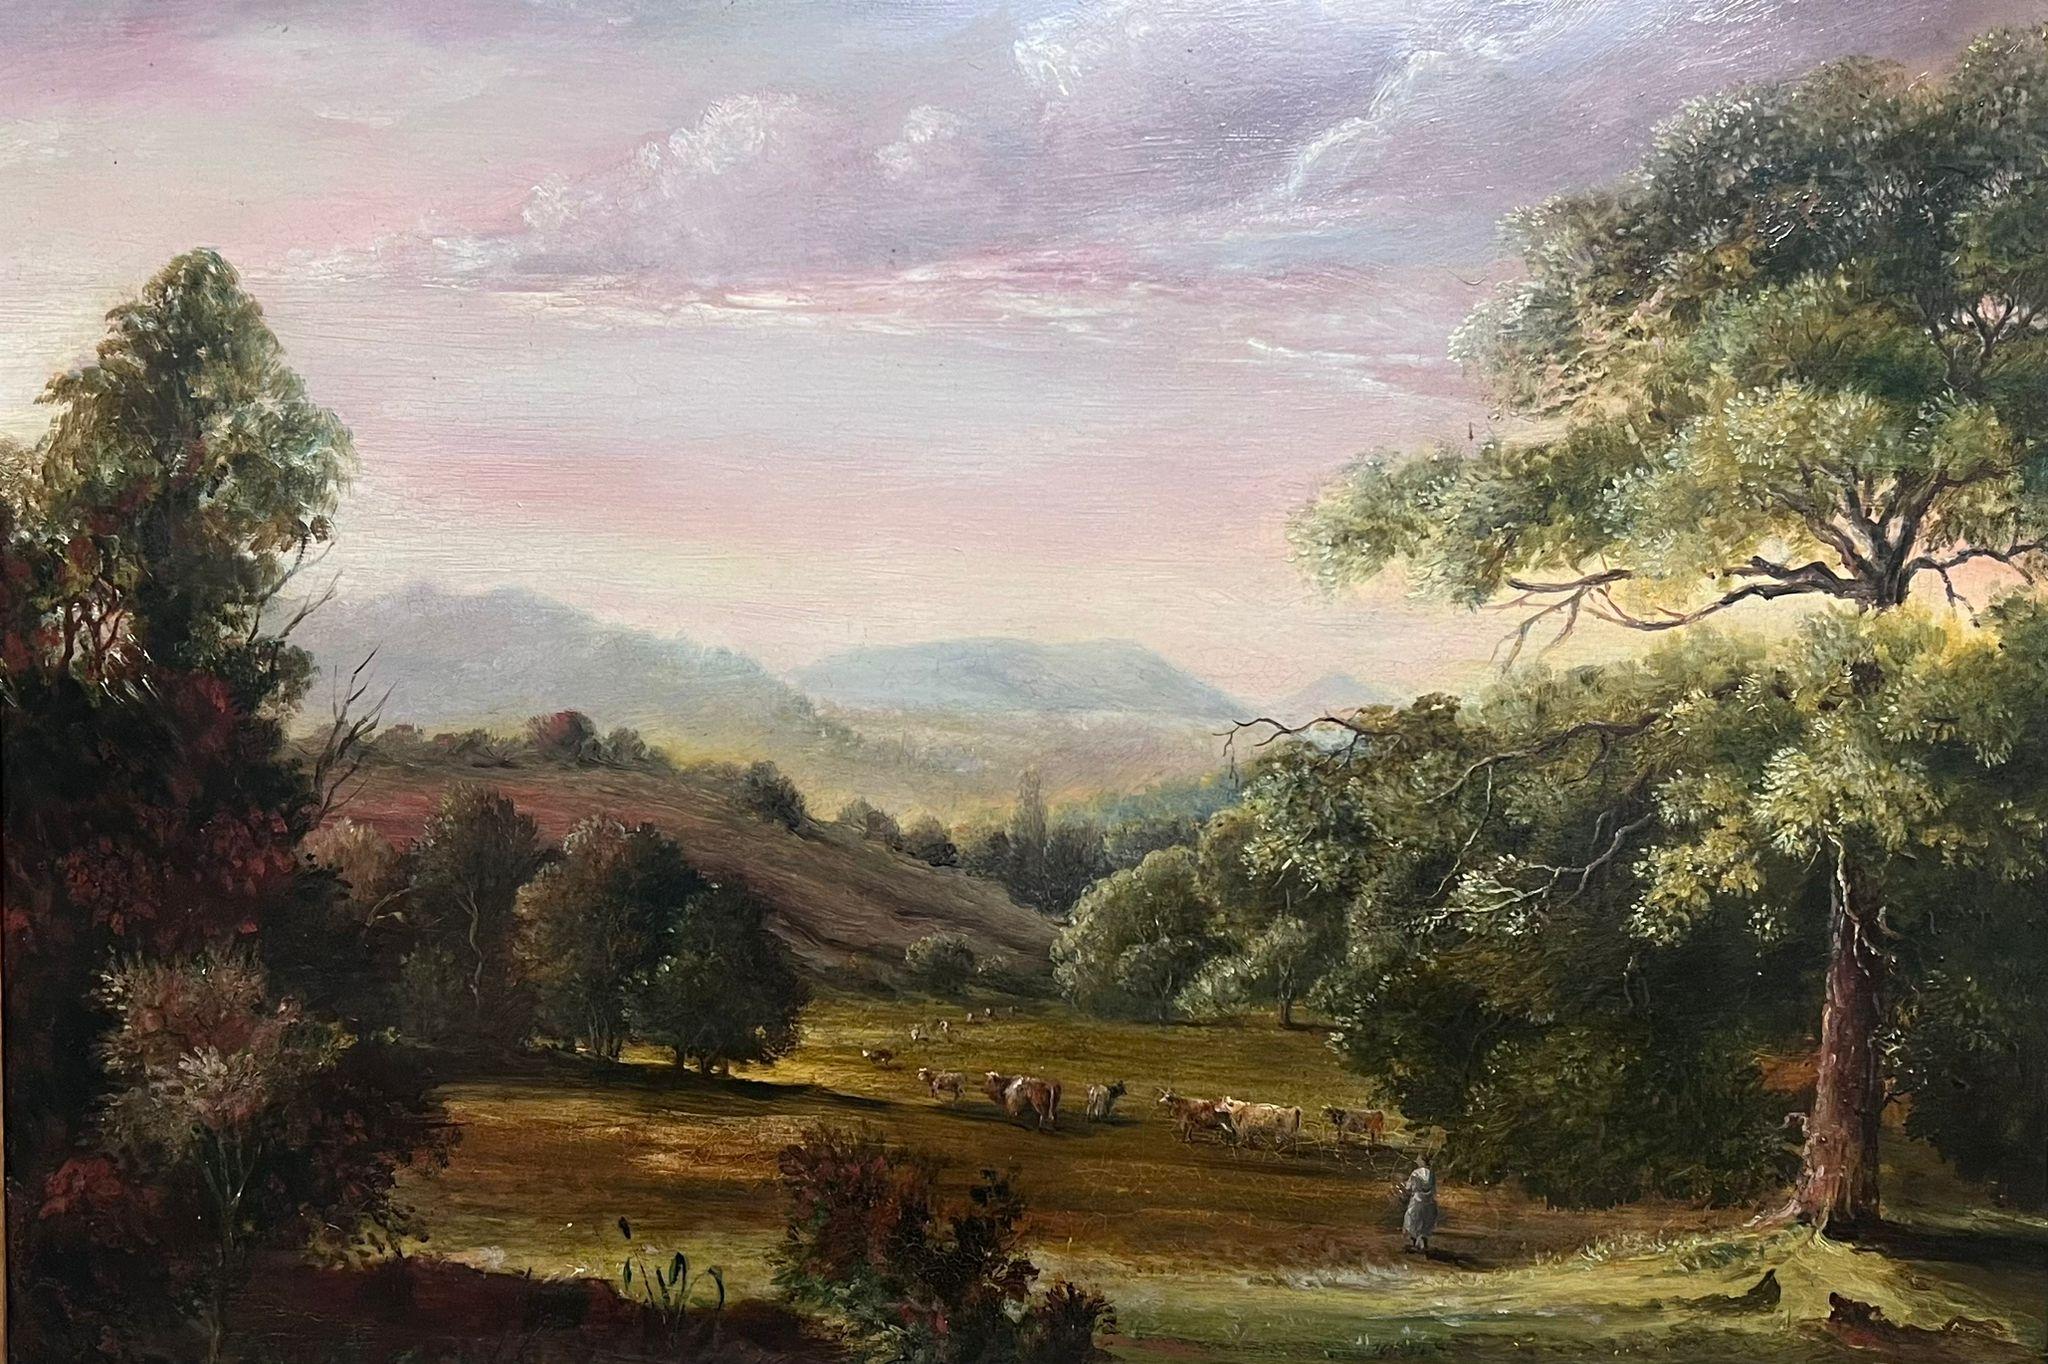 Tranquil Pastures
British artist, late 19th century
oil on board, framed
framed: 20 x 27 inches
board: 13 x 21 inches
provenance: private collection, UK
condition: overall good and sound condition (please note due to the fragility of old frames we